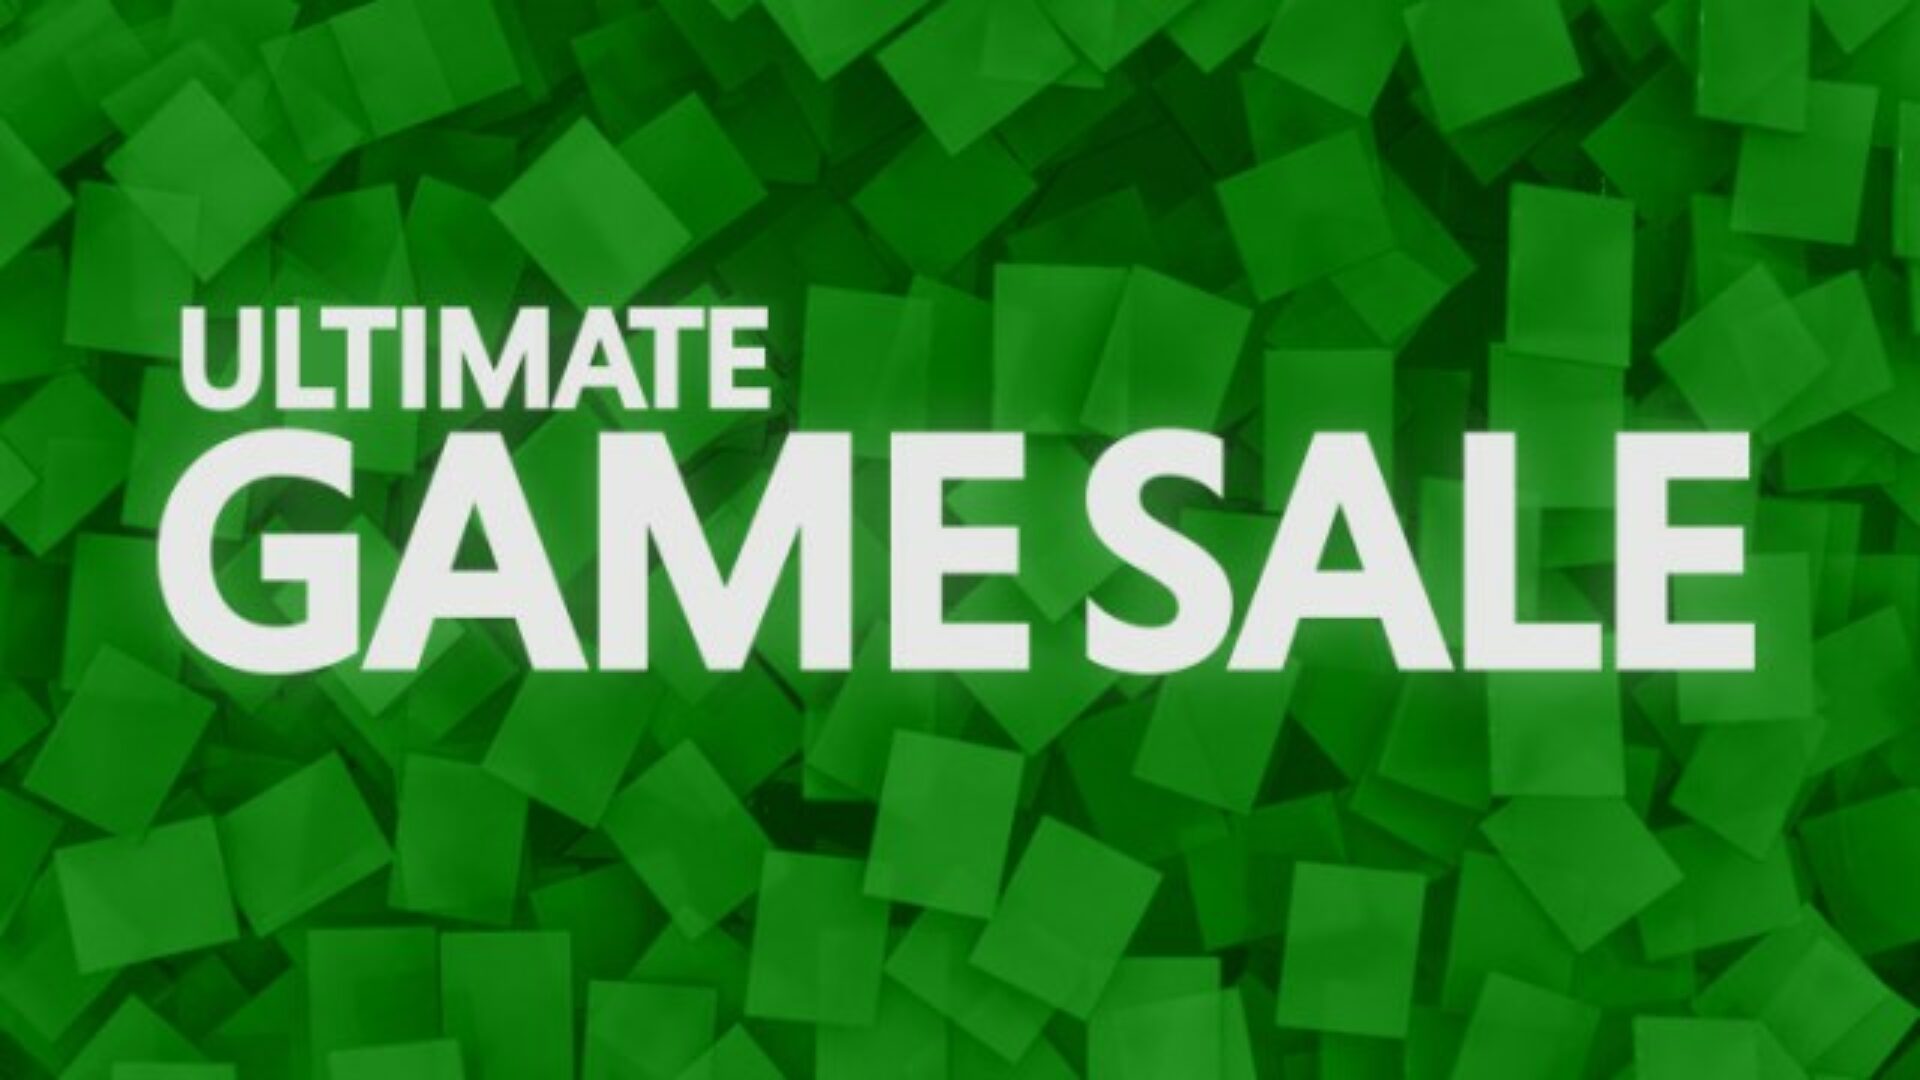 Ultimate Xbox Game Sale Goes Live!